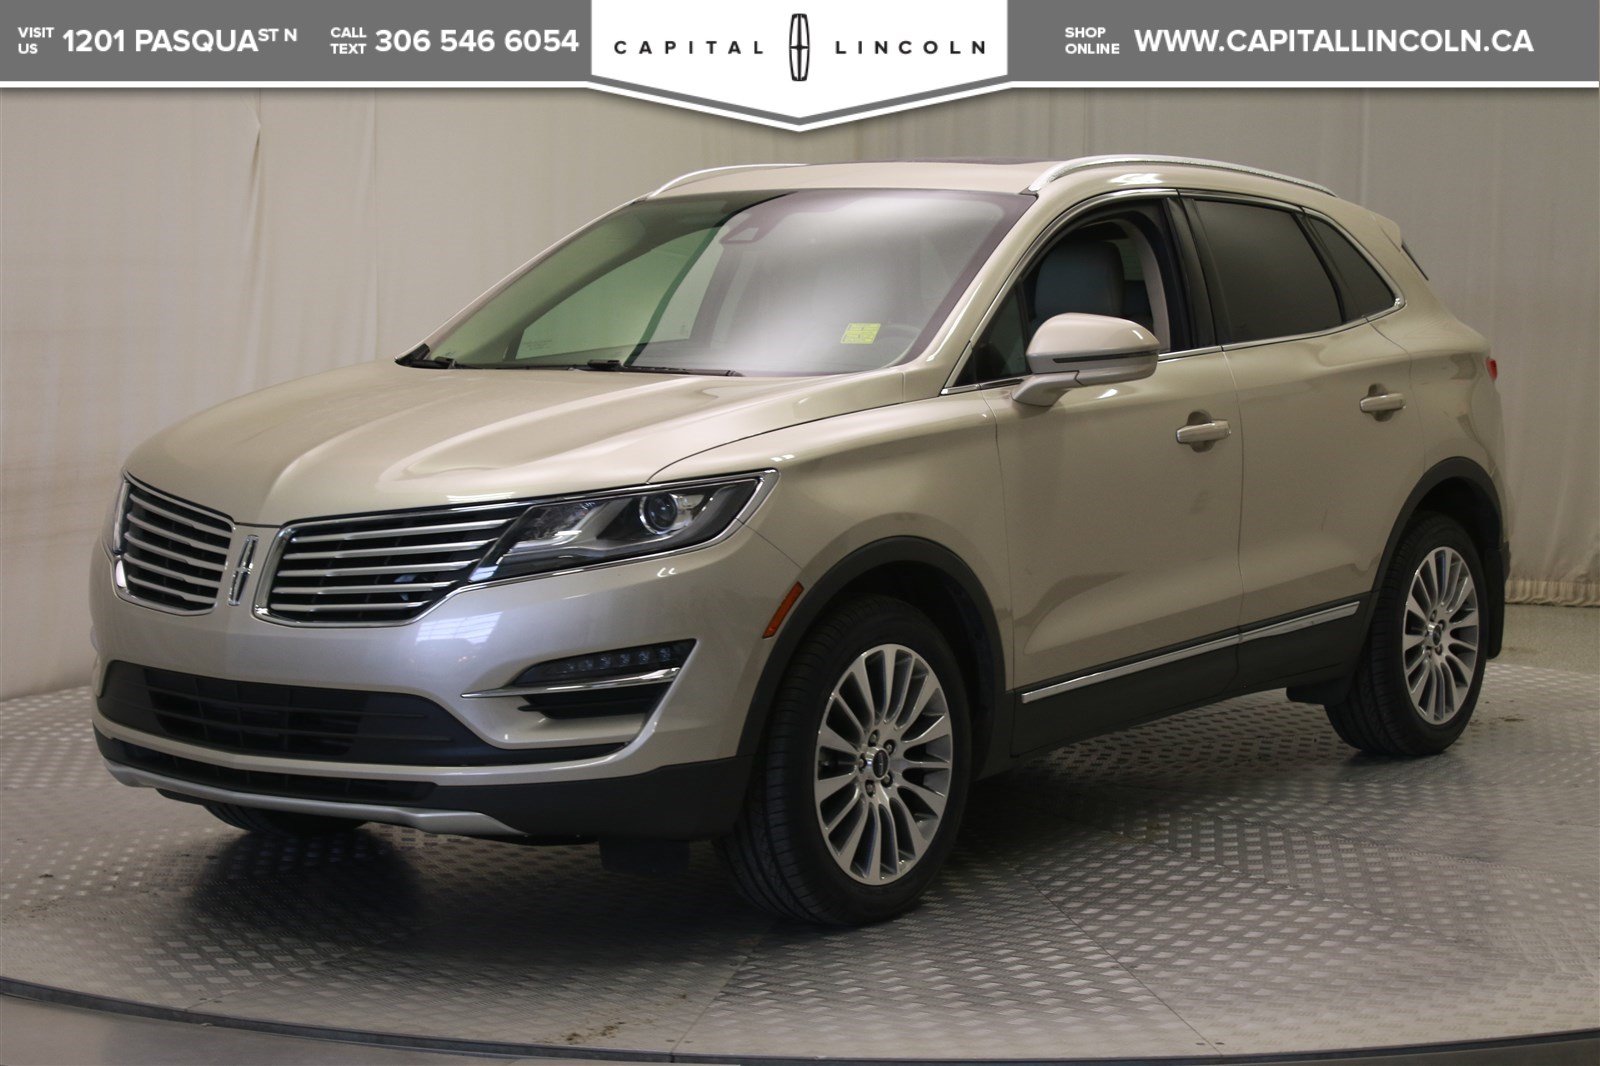 2016 lincoln mkc owners manual